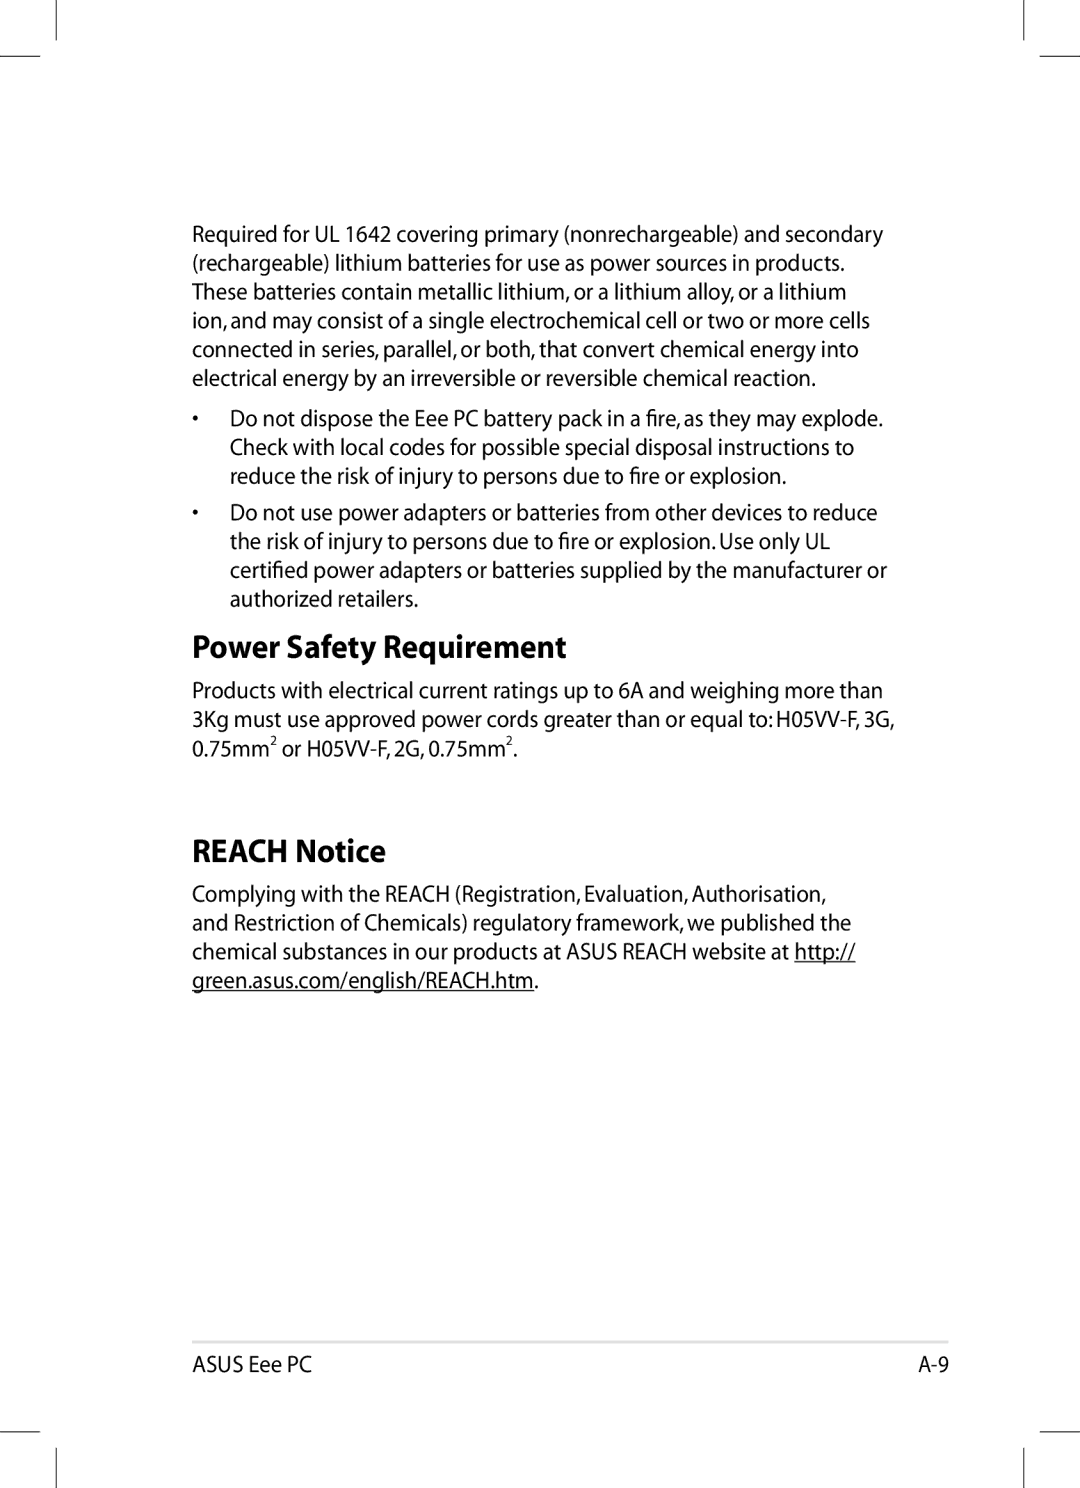 Asus 1008P-KR-PU27-PI user manual Power Safety Requirement, Reach Notice 